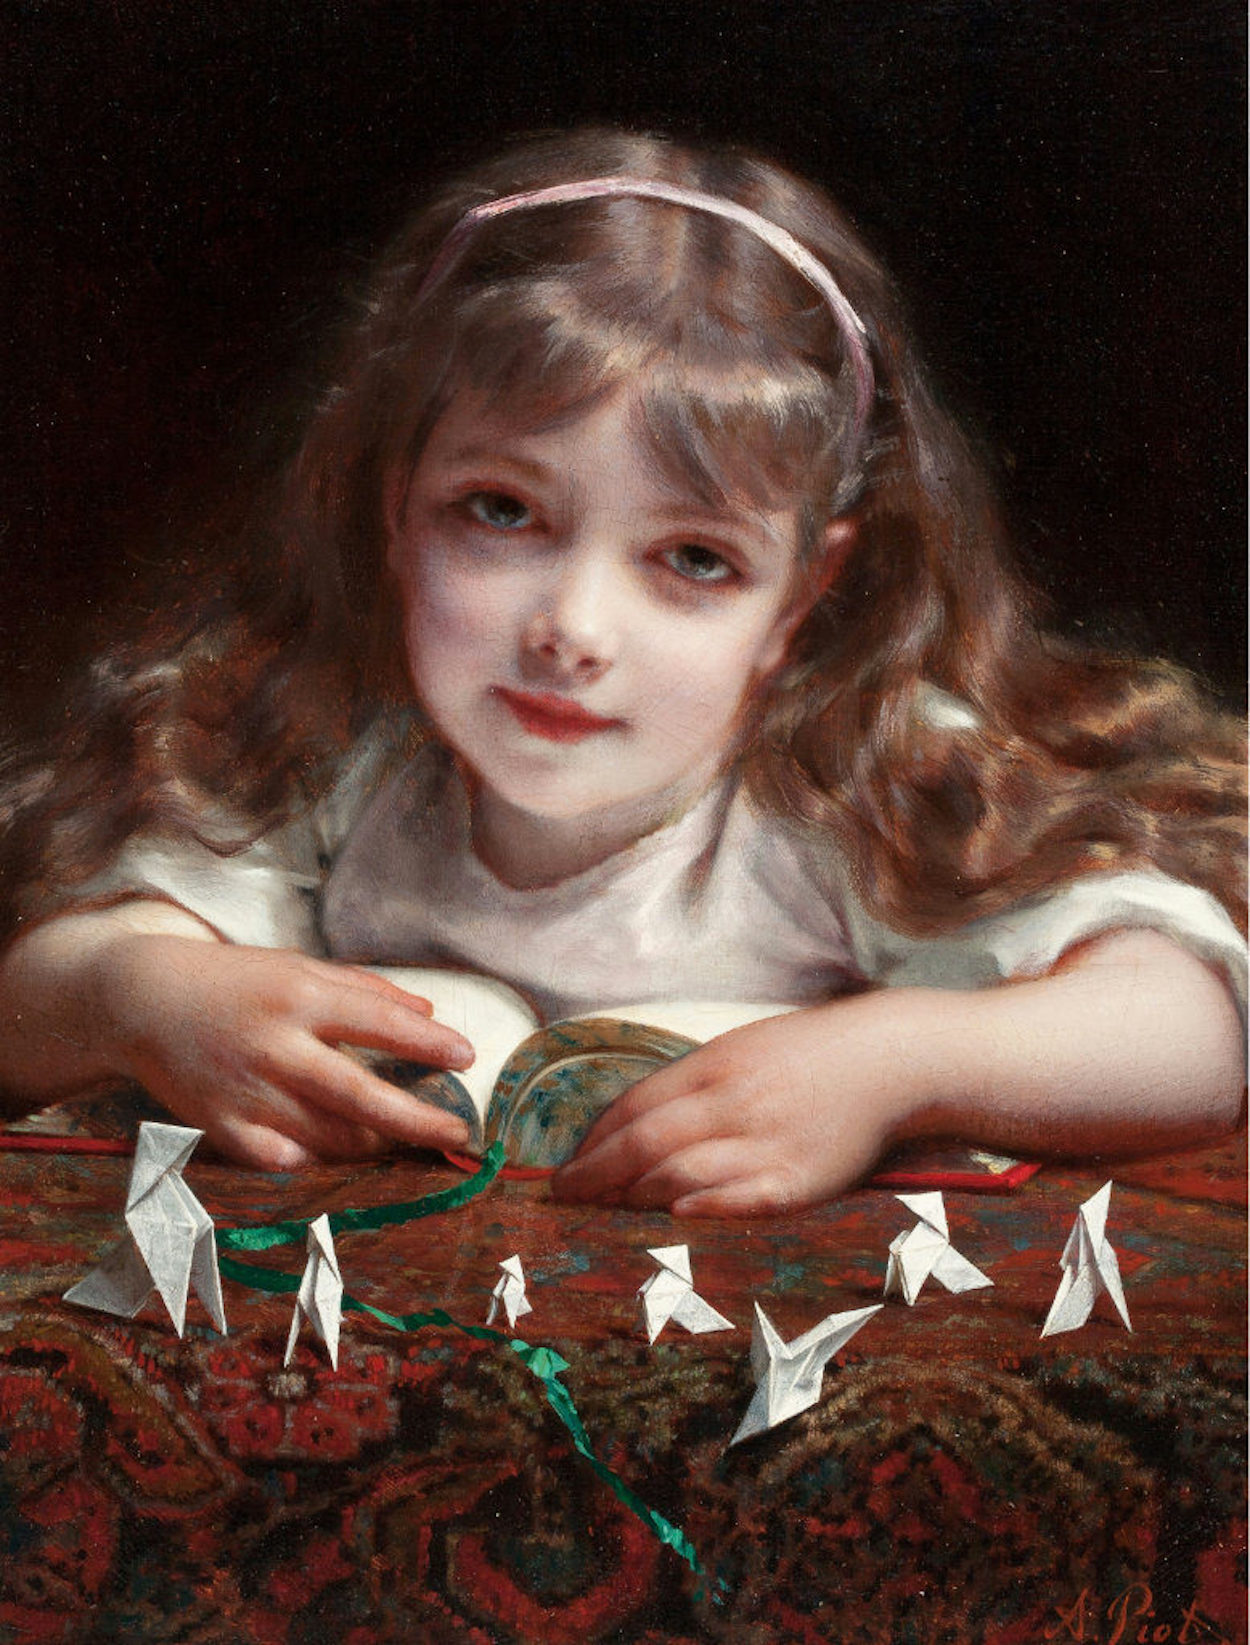 Vise cu origami by Adolphe Piot - 1850-1910 - 52 x 39,5 cm 